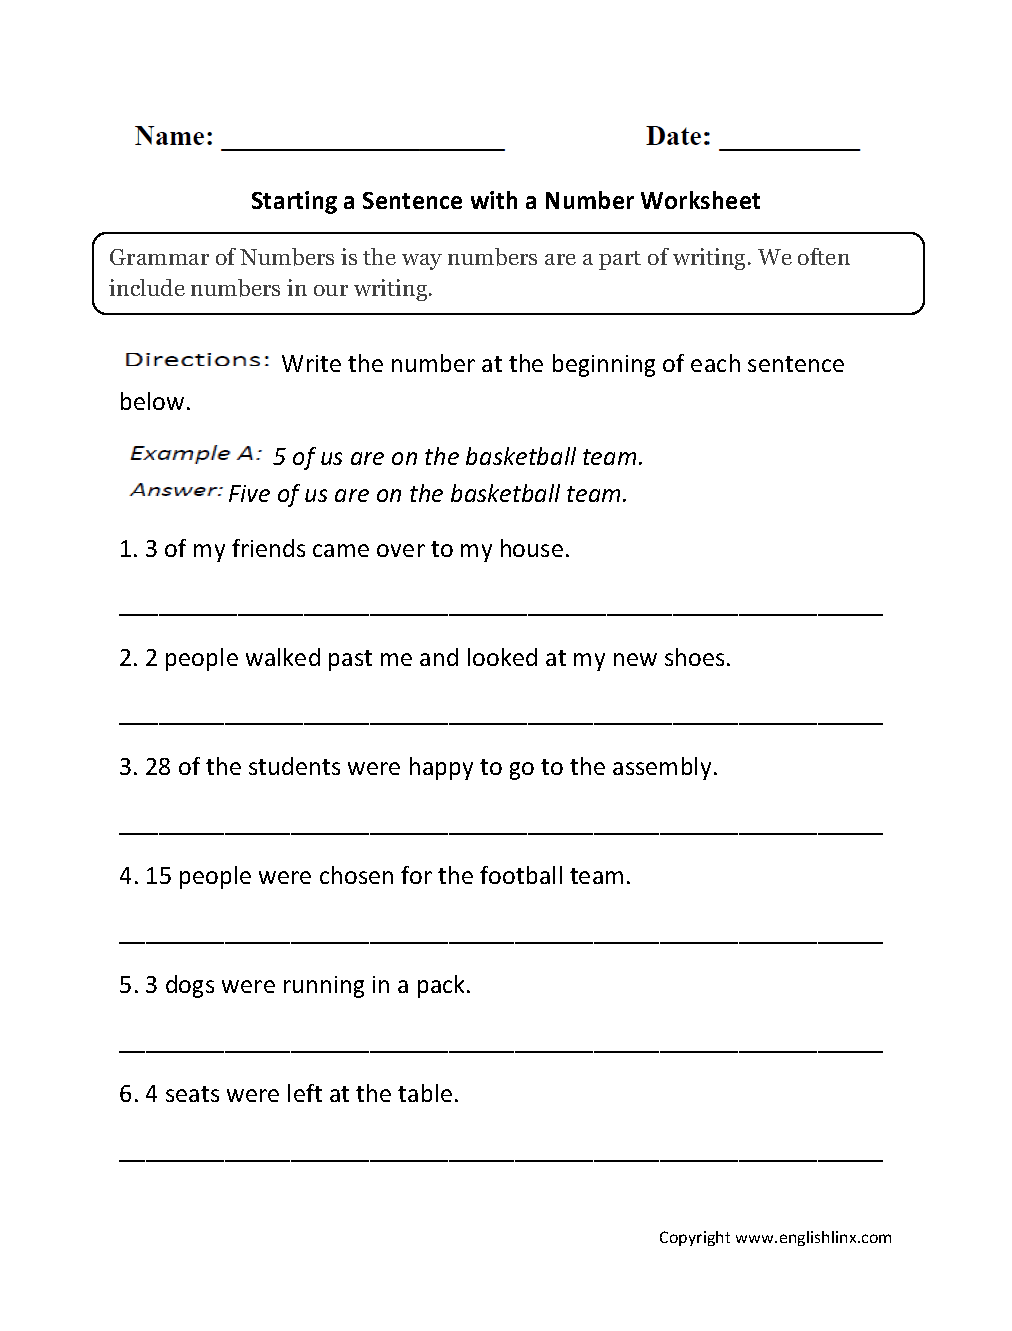 Starting Sentence with Number Worksheets